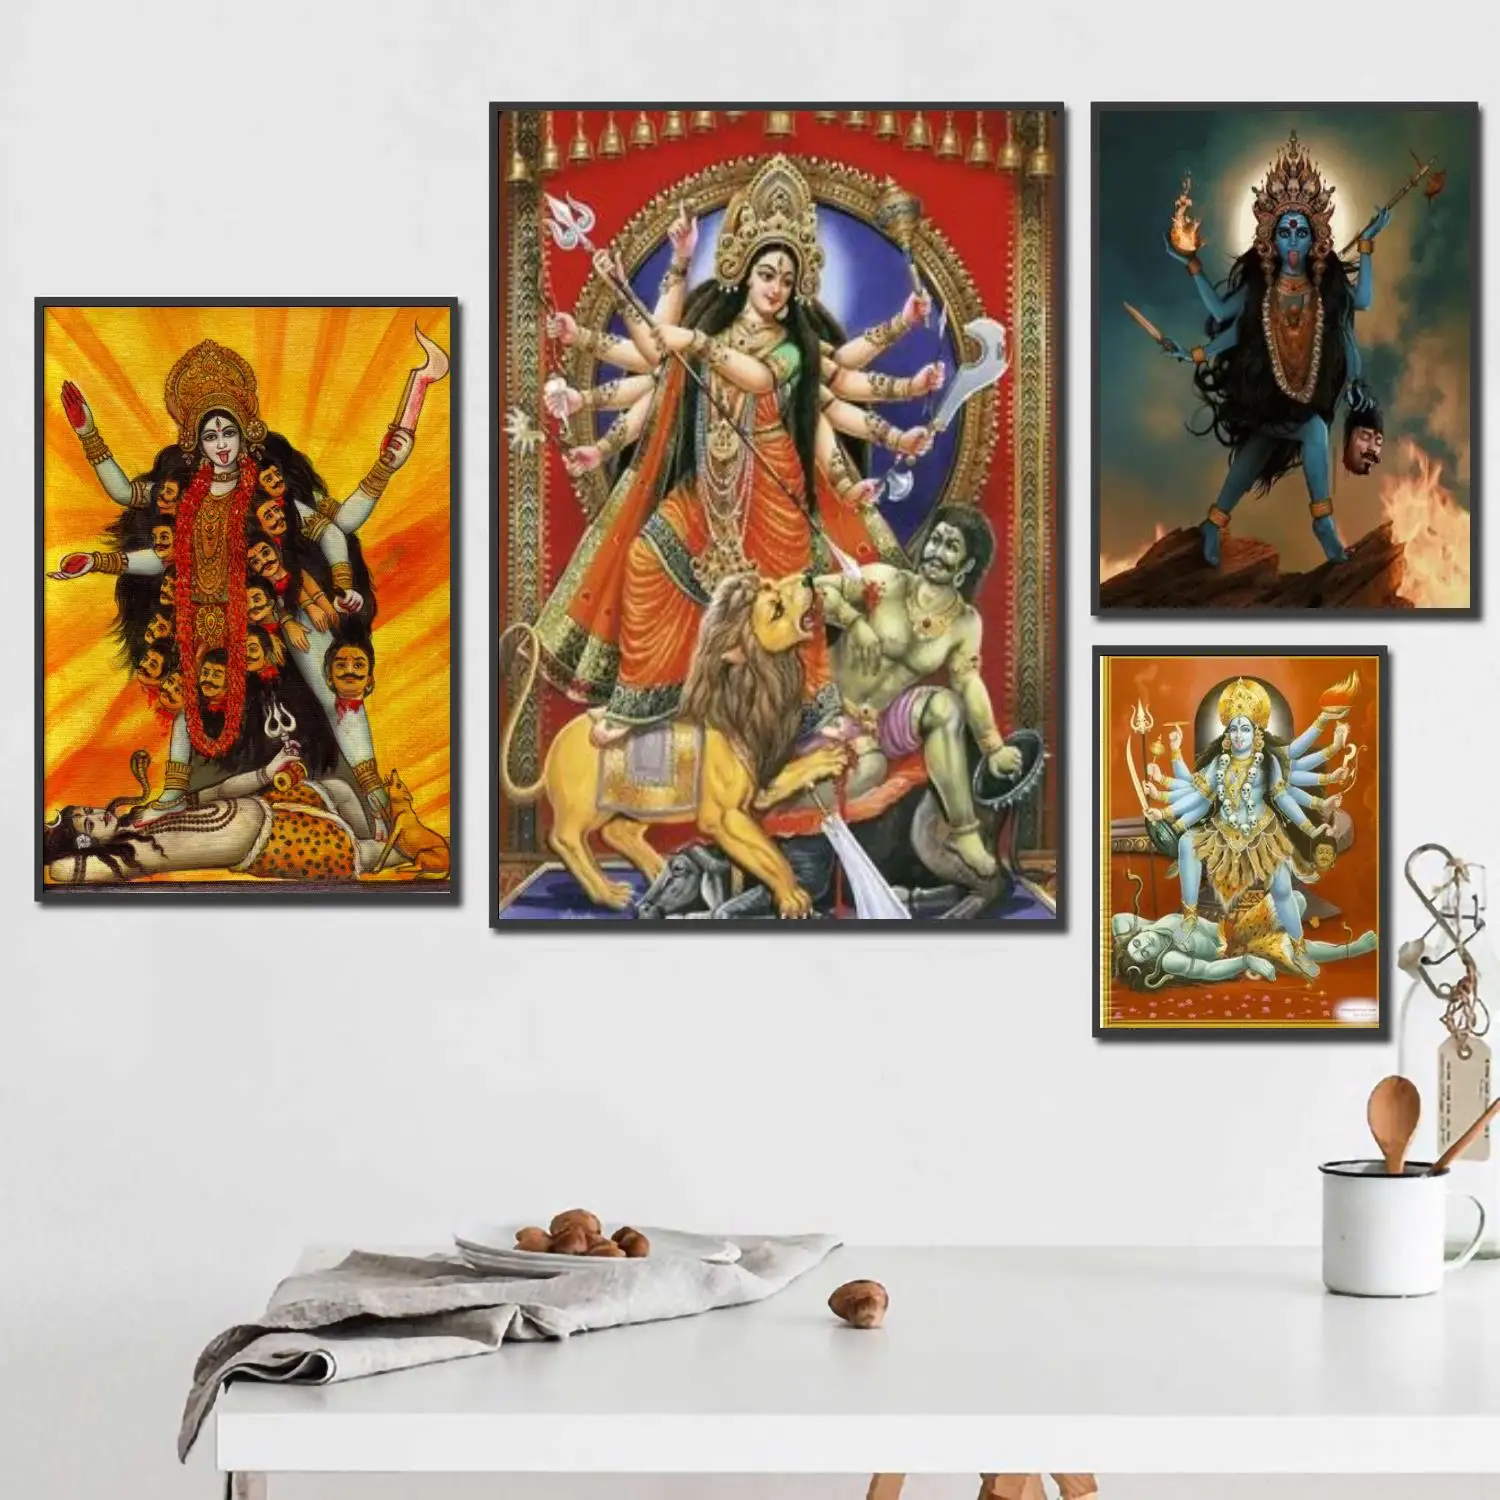 

maa kali poster 24x36 Decorative Canvas Posters Room Bar Cafe Decor Gift Print Art Wall Paintings